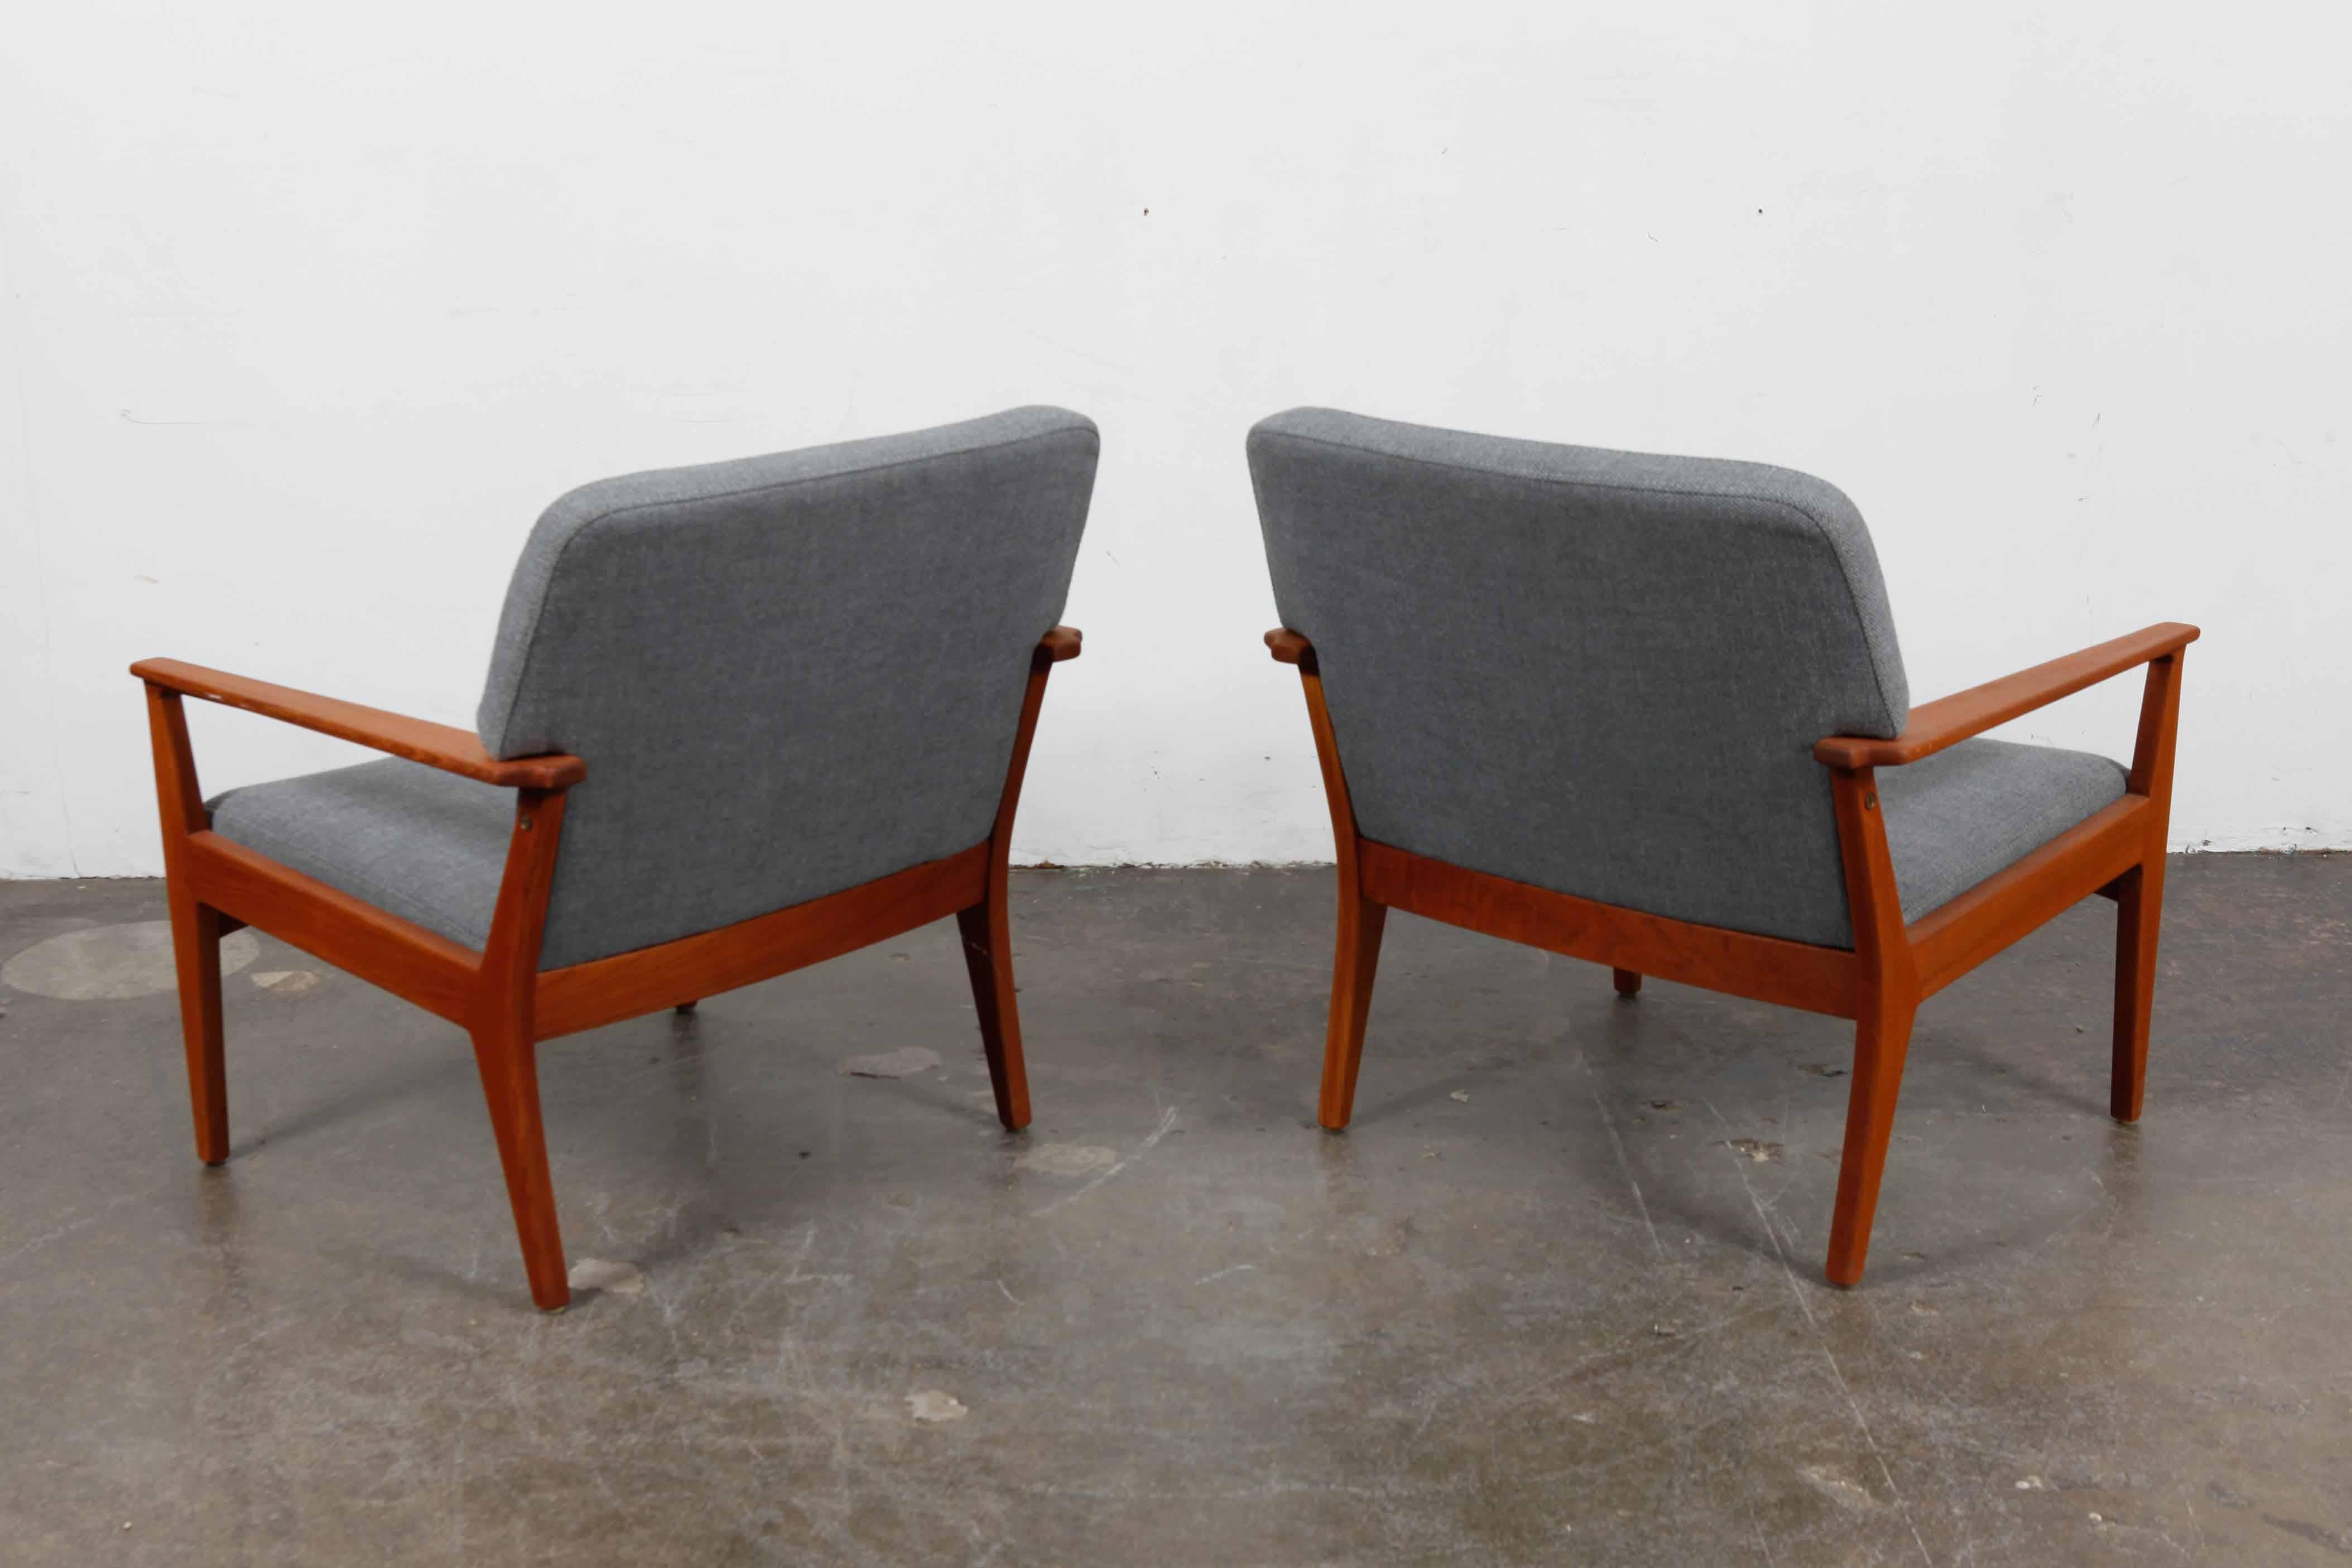 Fabric Pair of Swedish Teak 1960s Lounge Chairs Newly Refinished and Reupholstered